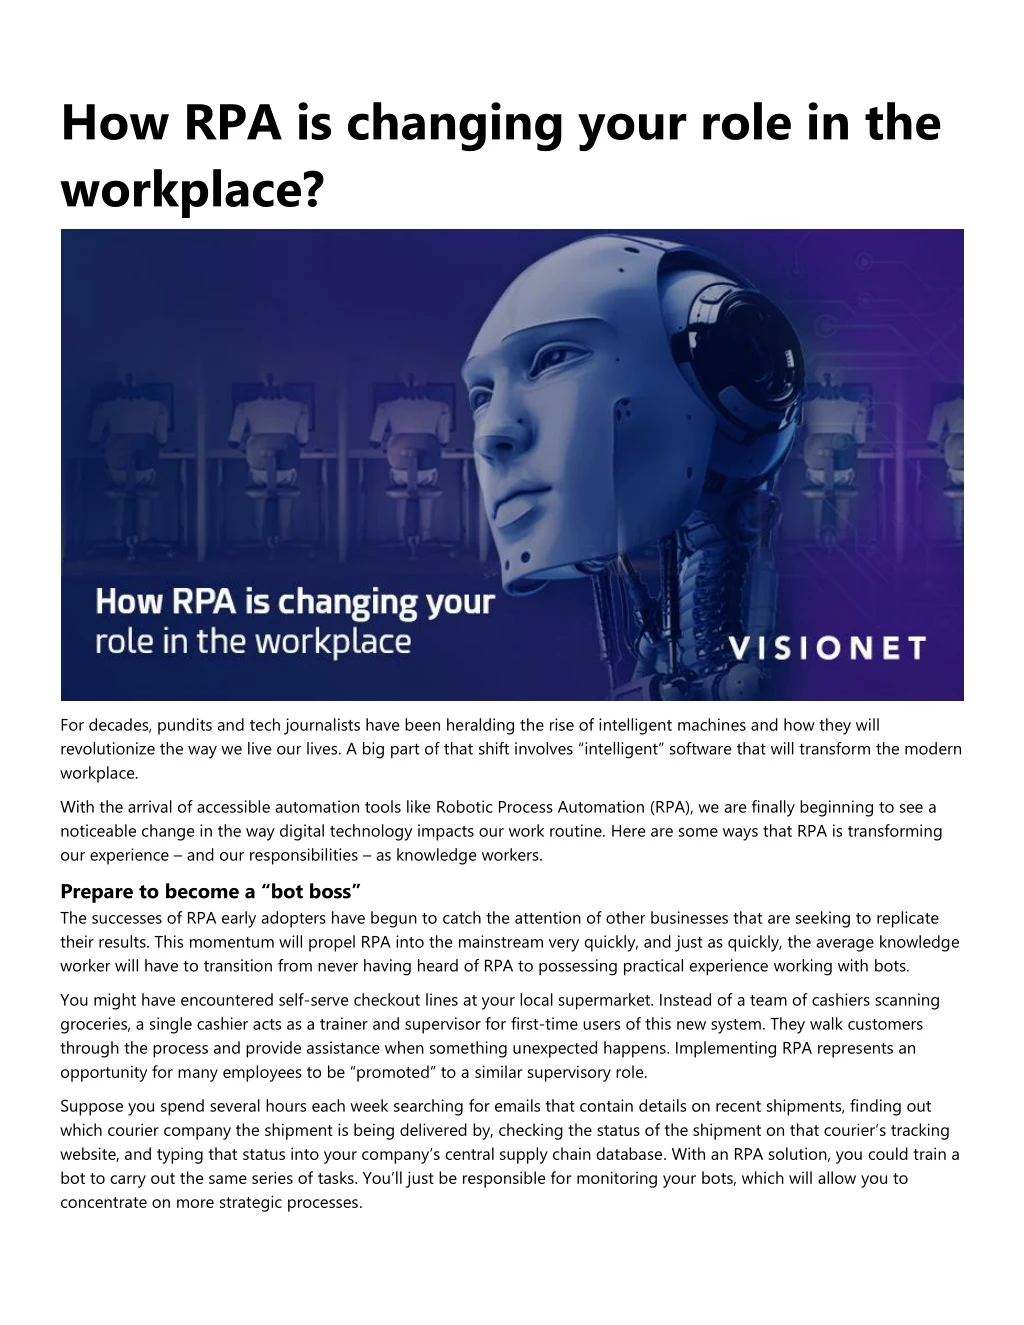 how rpa is changing your role in the workplace